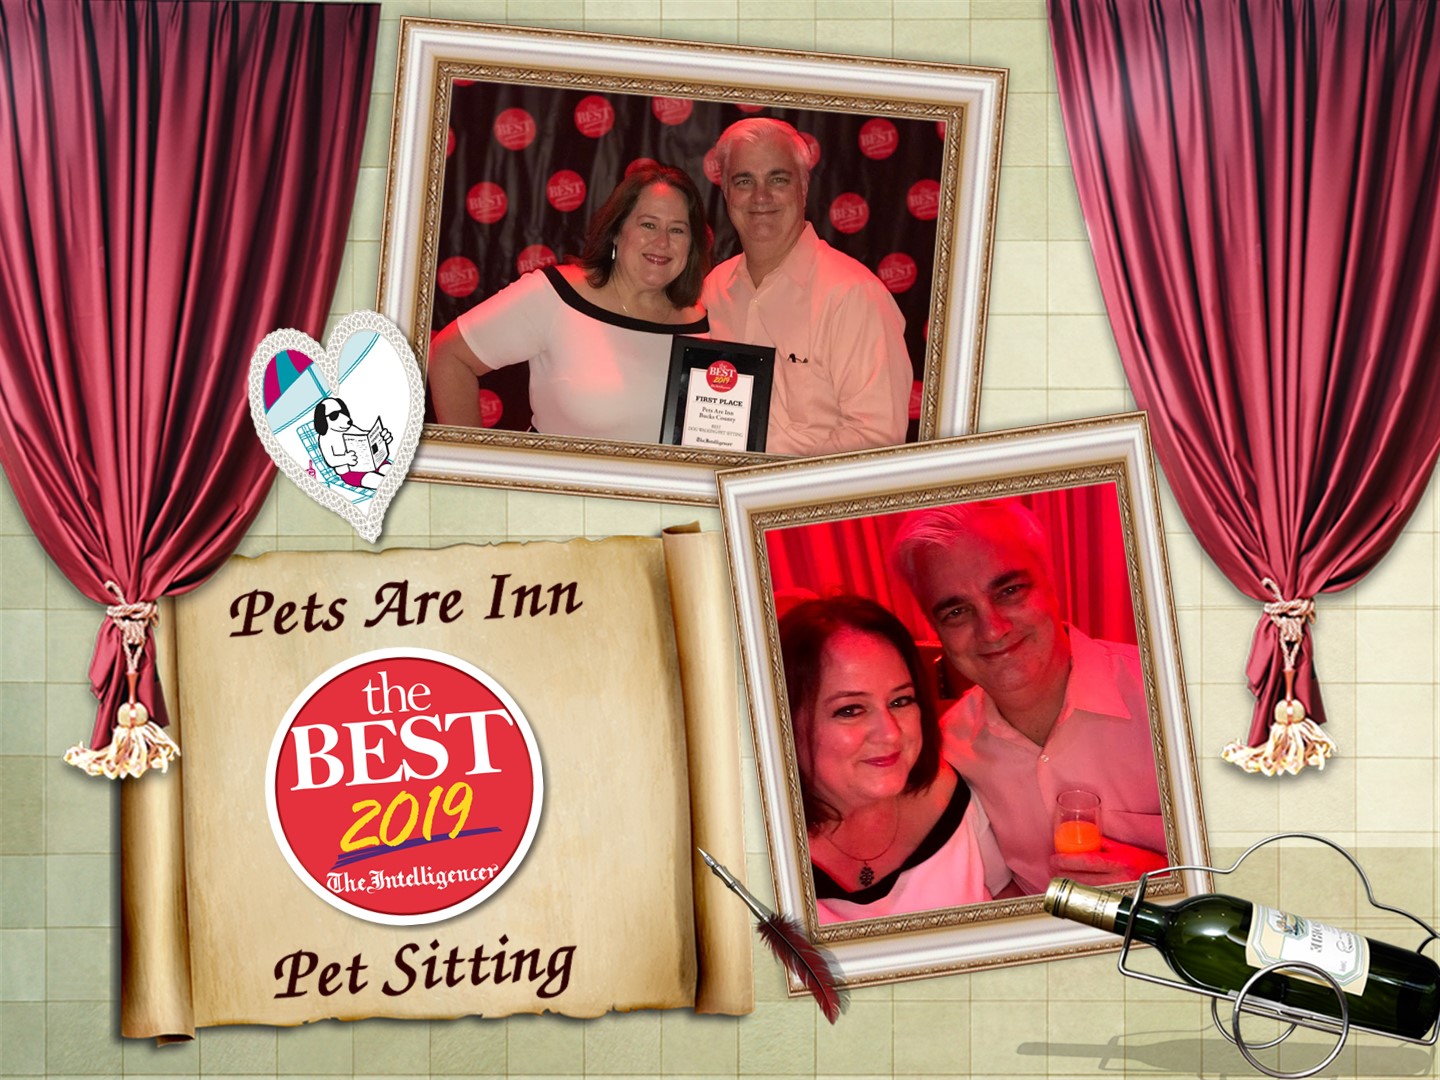 It's an honor to be named the BEST 2019 in Pet Sitting! Thank you all!